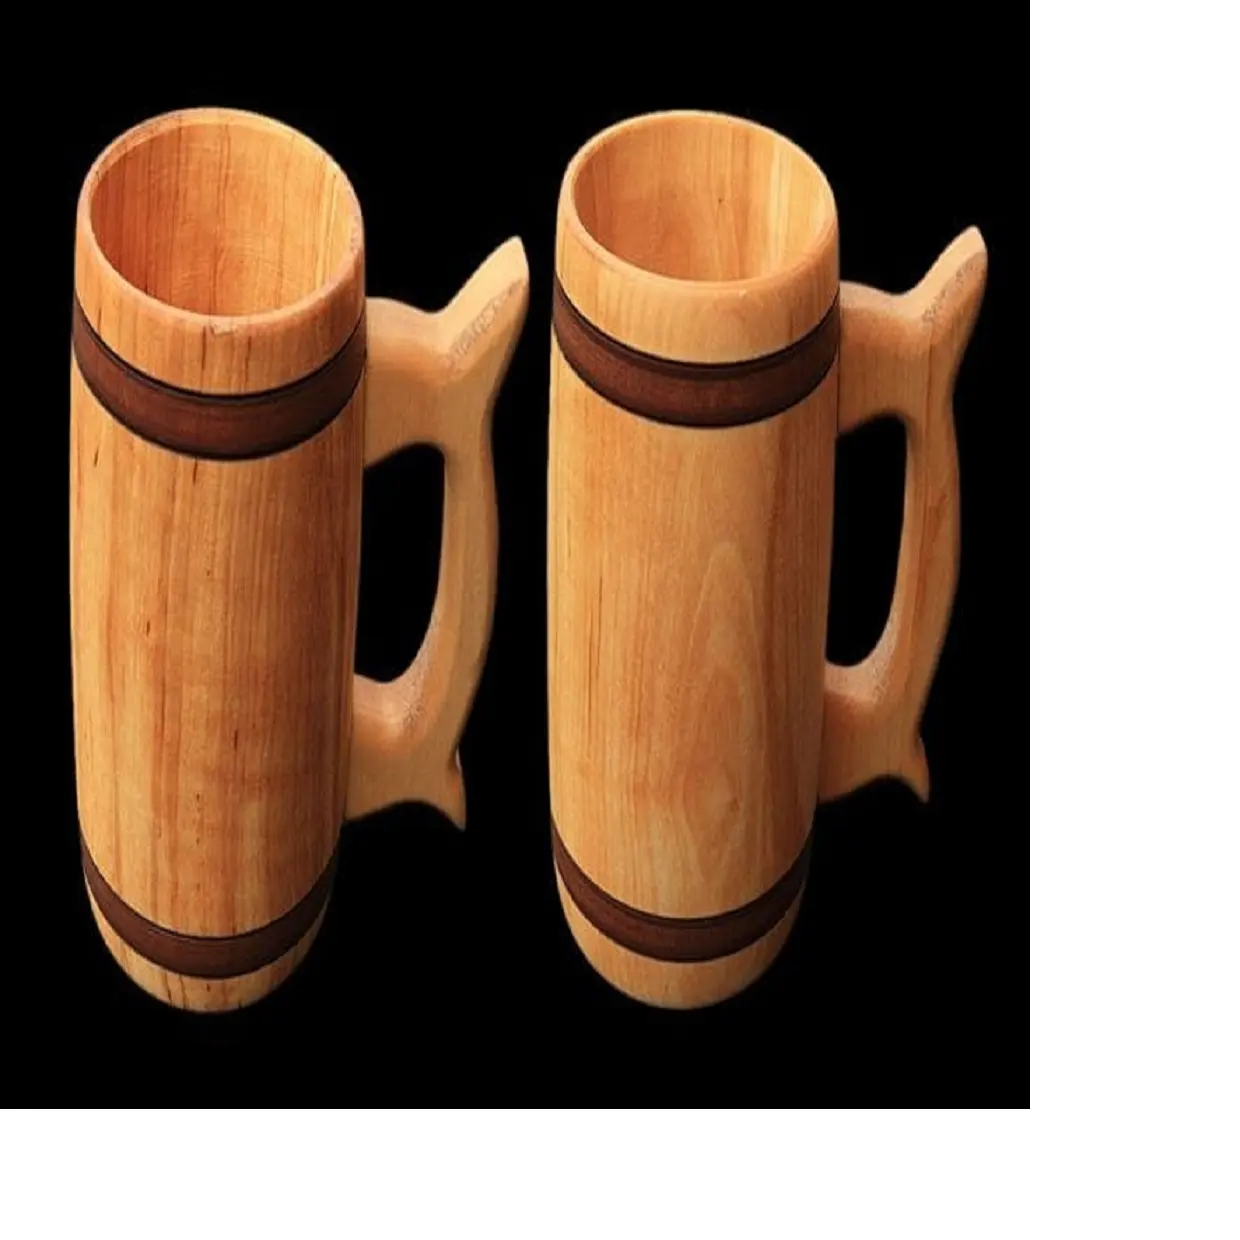 custom made wooden long drinking mugs good for craft beer manufacturers available in a wide assortment of designs